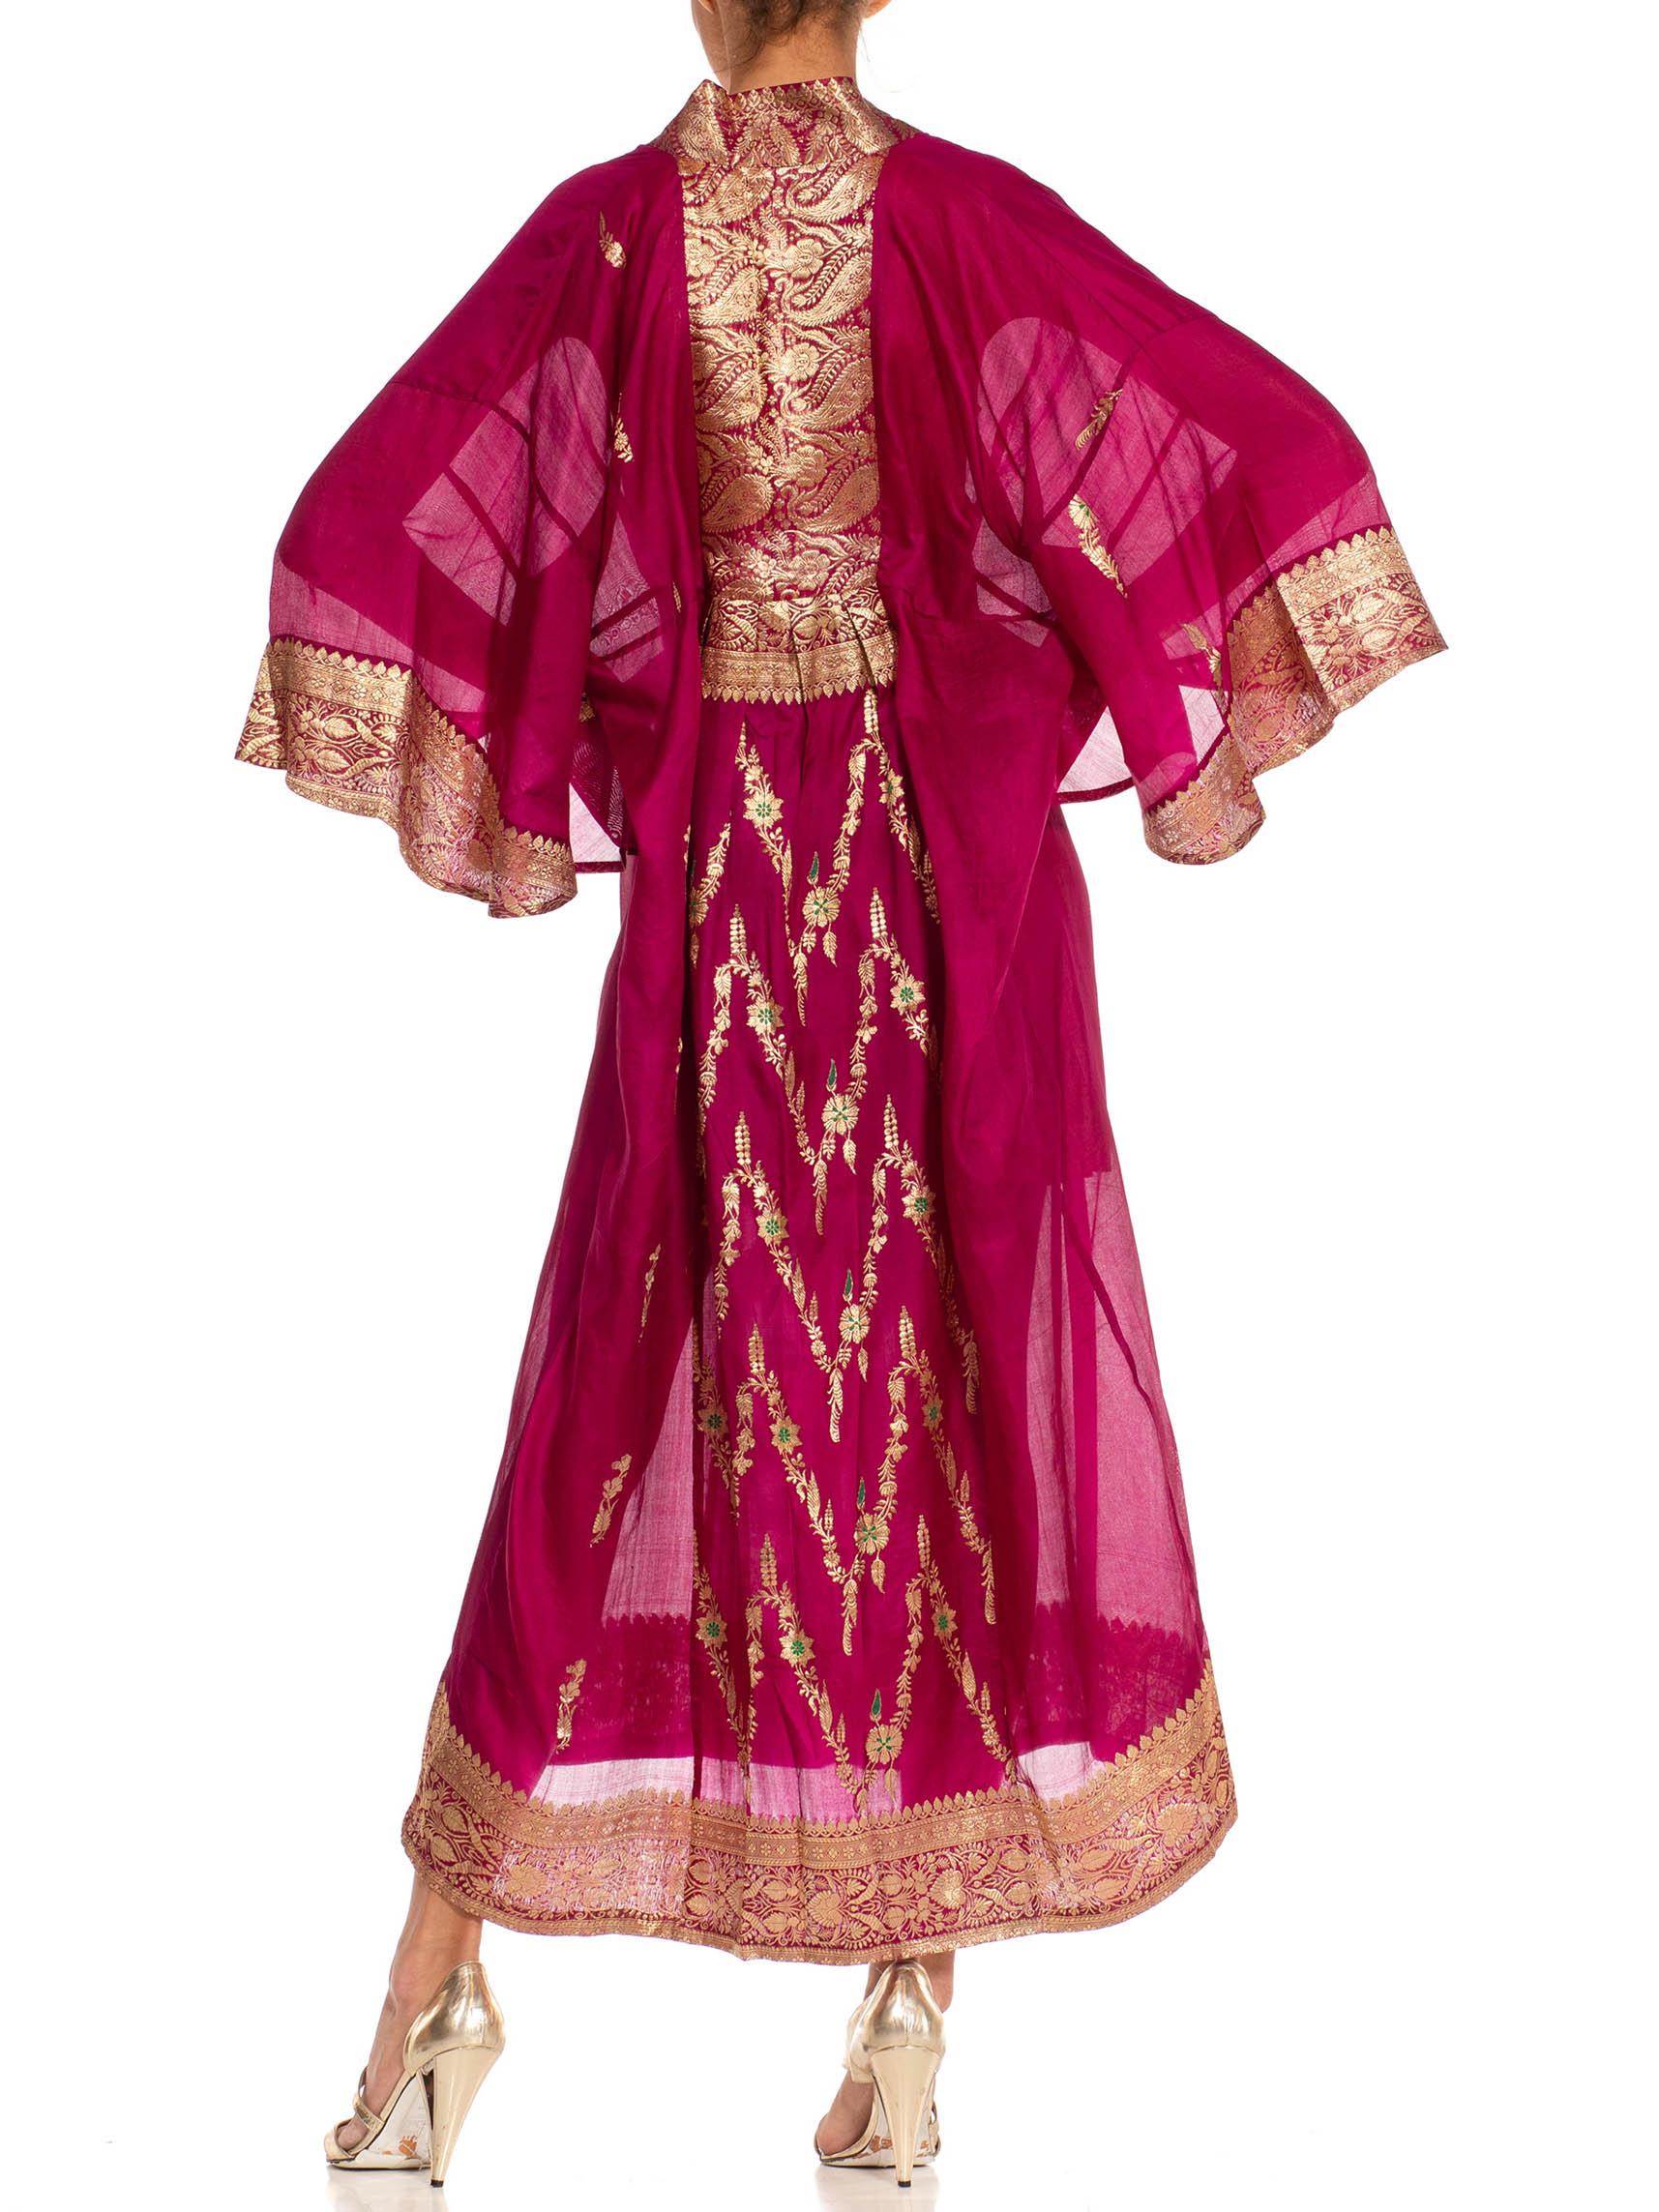 Morphew Collection Fuchsia & Gold Silk Kaftan Made From Vintage Saris For Sale 3